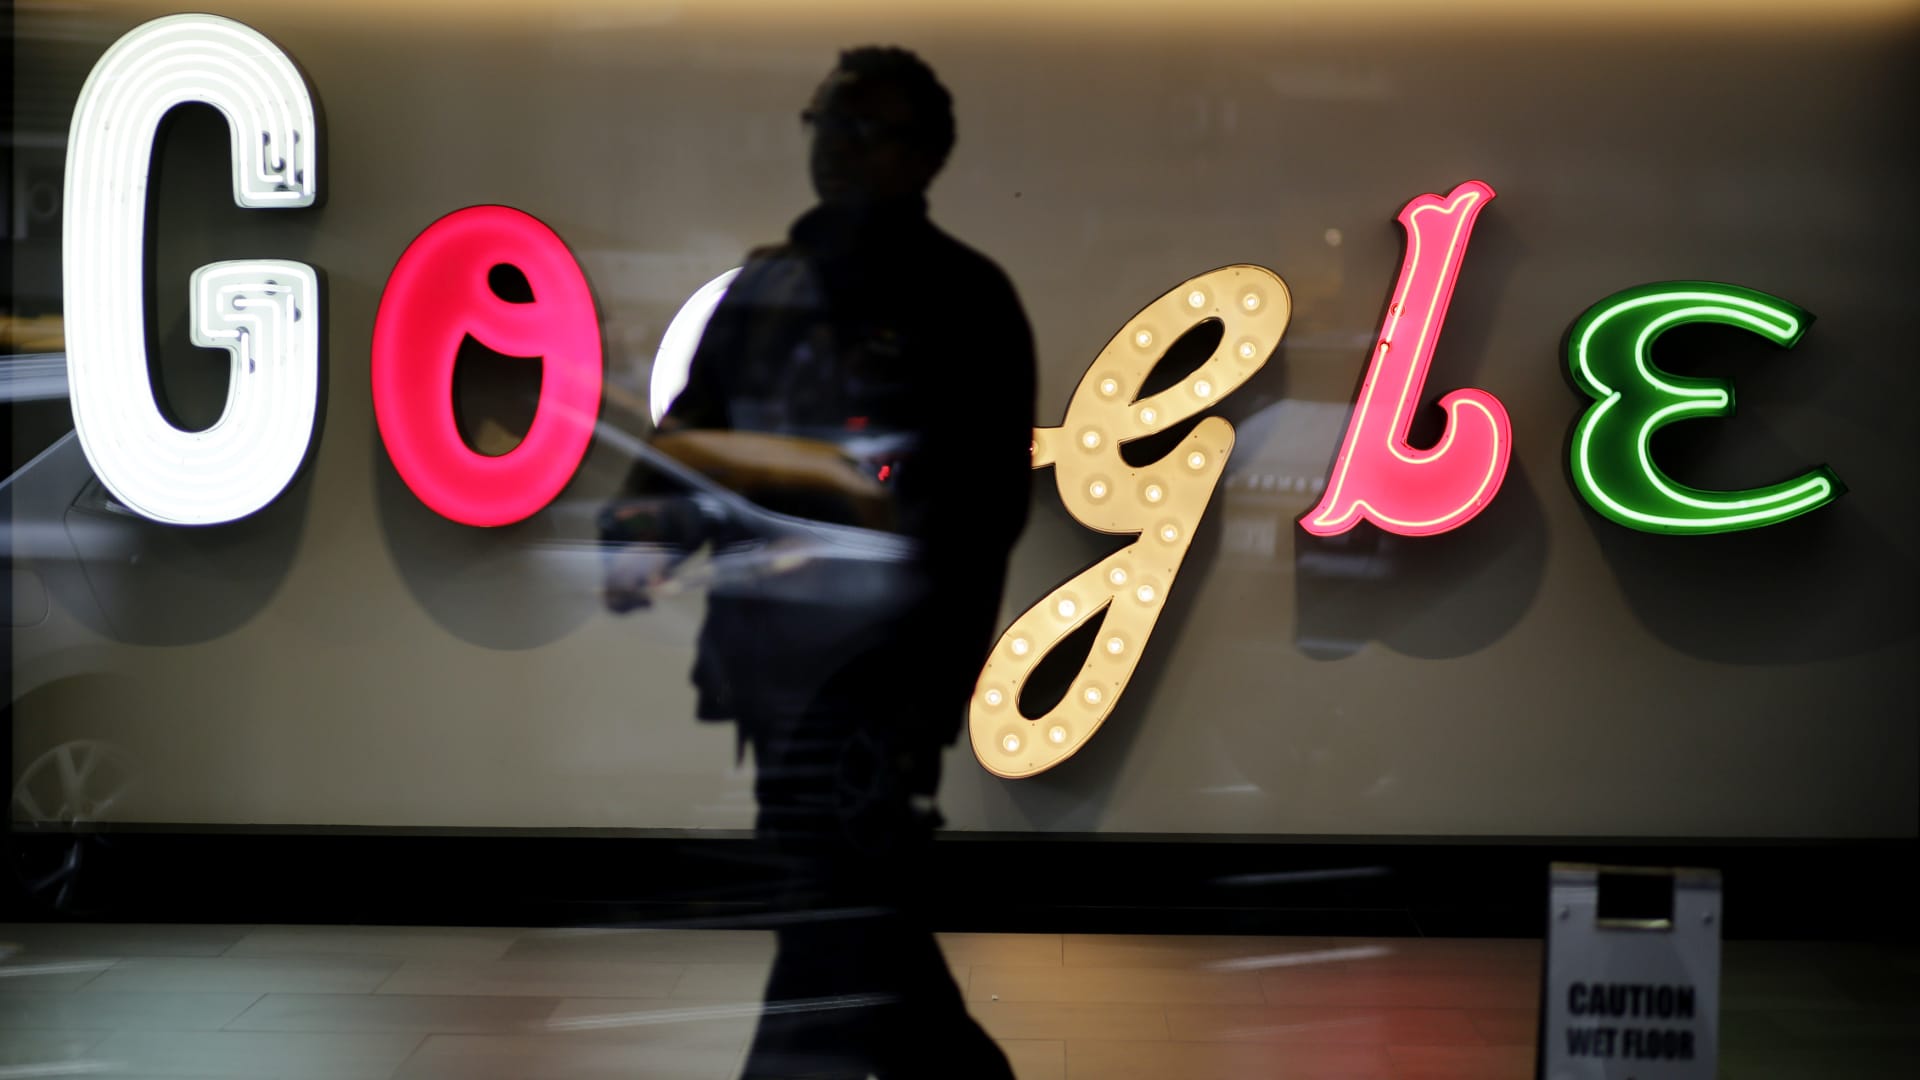 Google to destroy browsing data to settle consumer privacy lawsuit